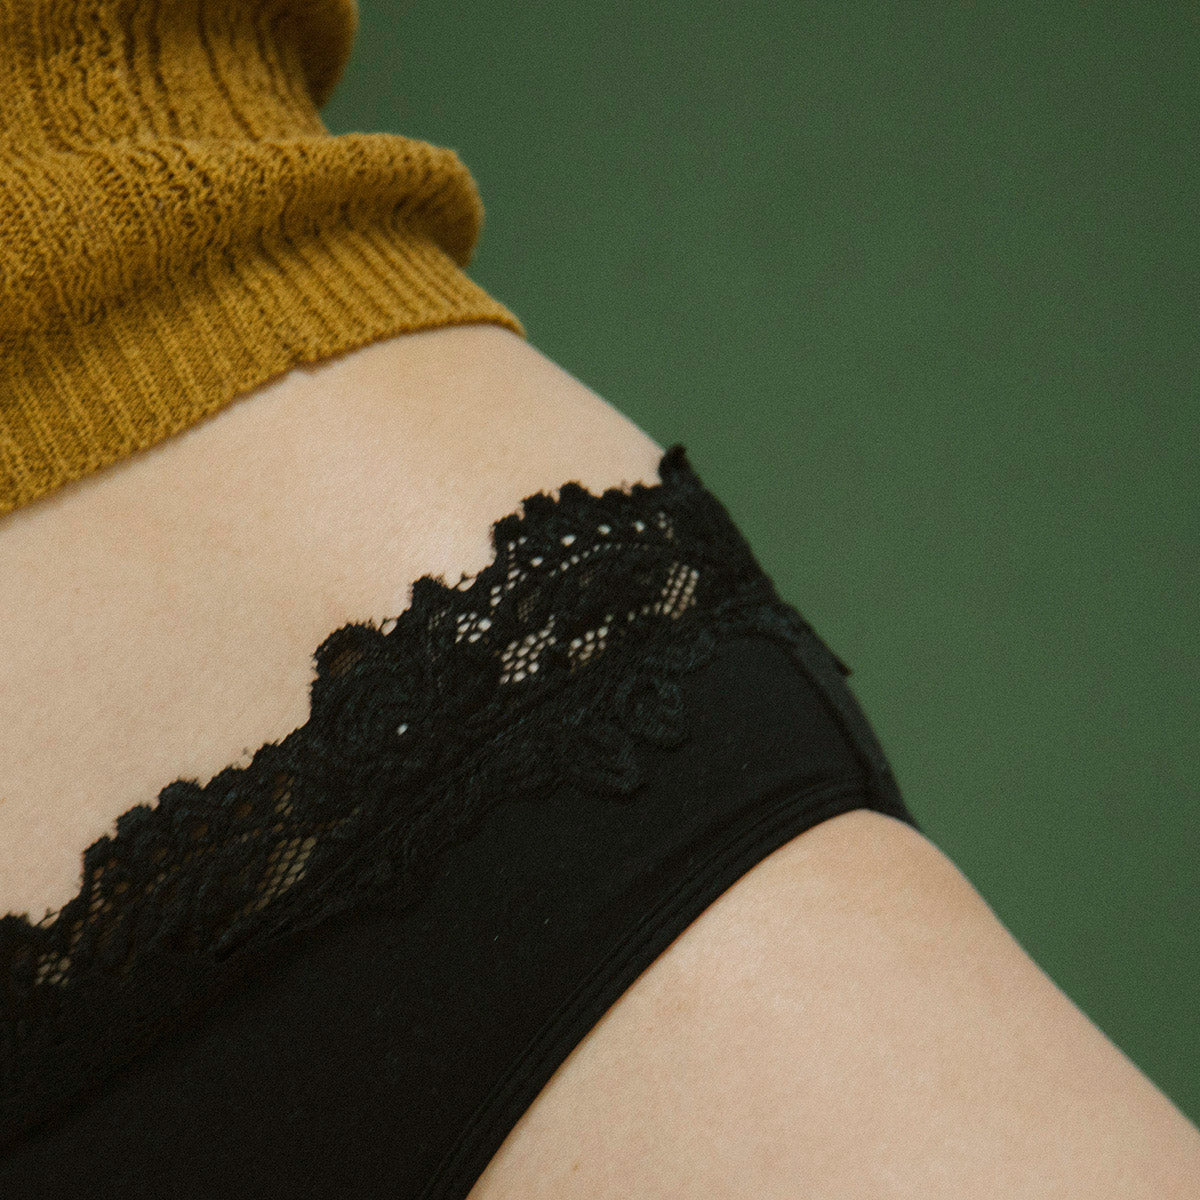 Sustainable and Ethical Reemi Period Underwear 